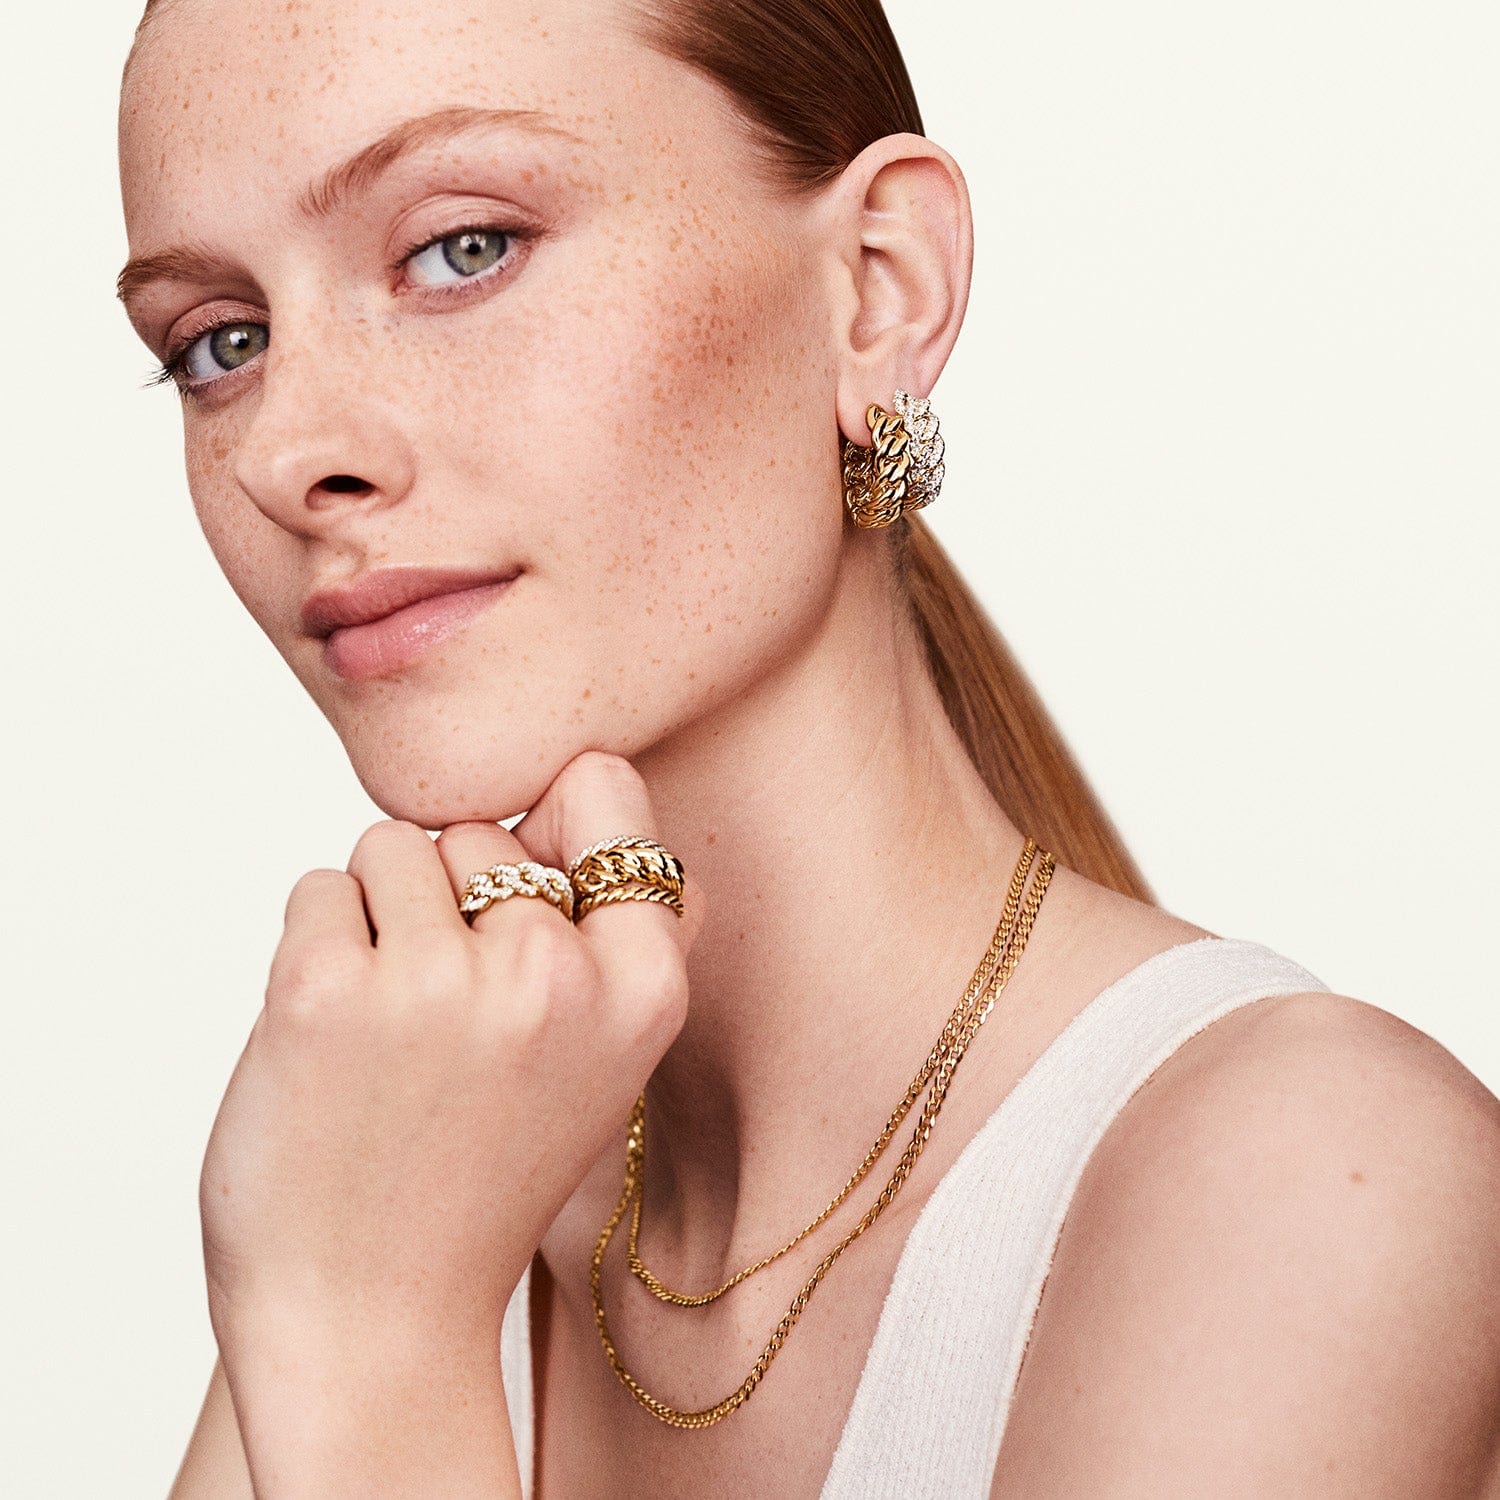 A person wearing a gold link ring, complemented with chain style jewelry.